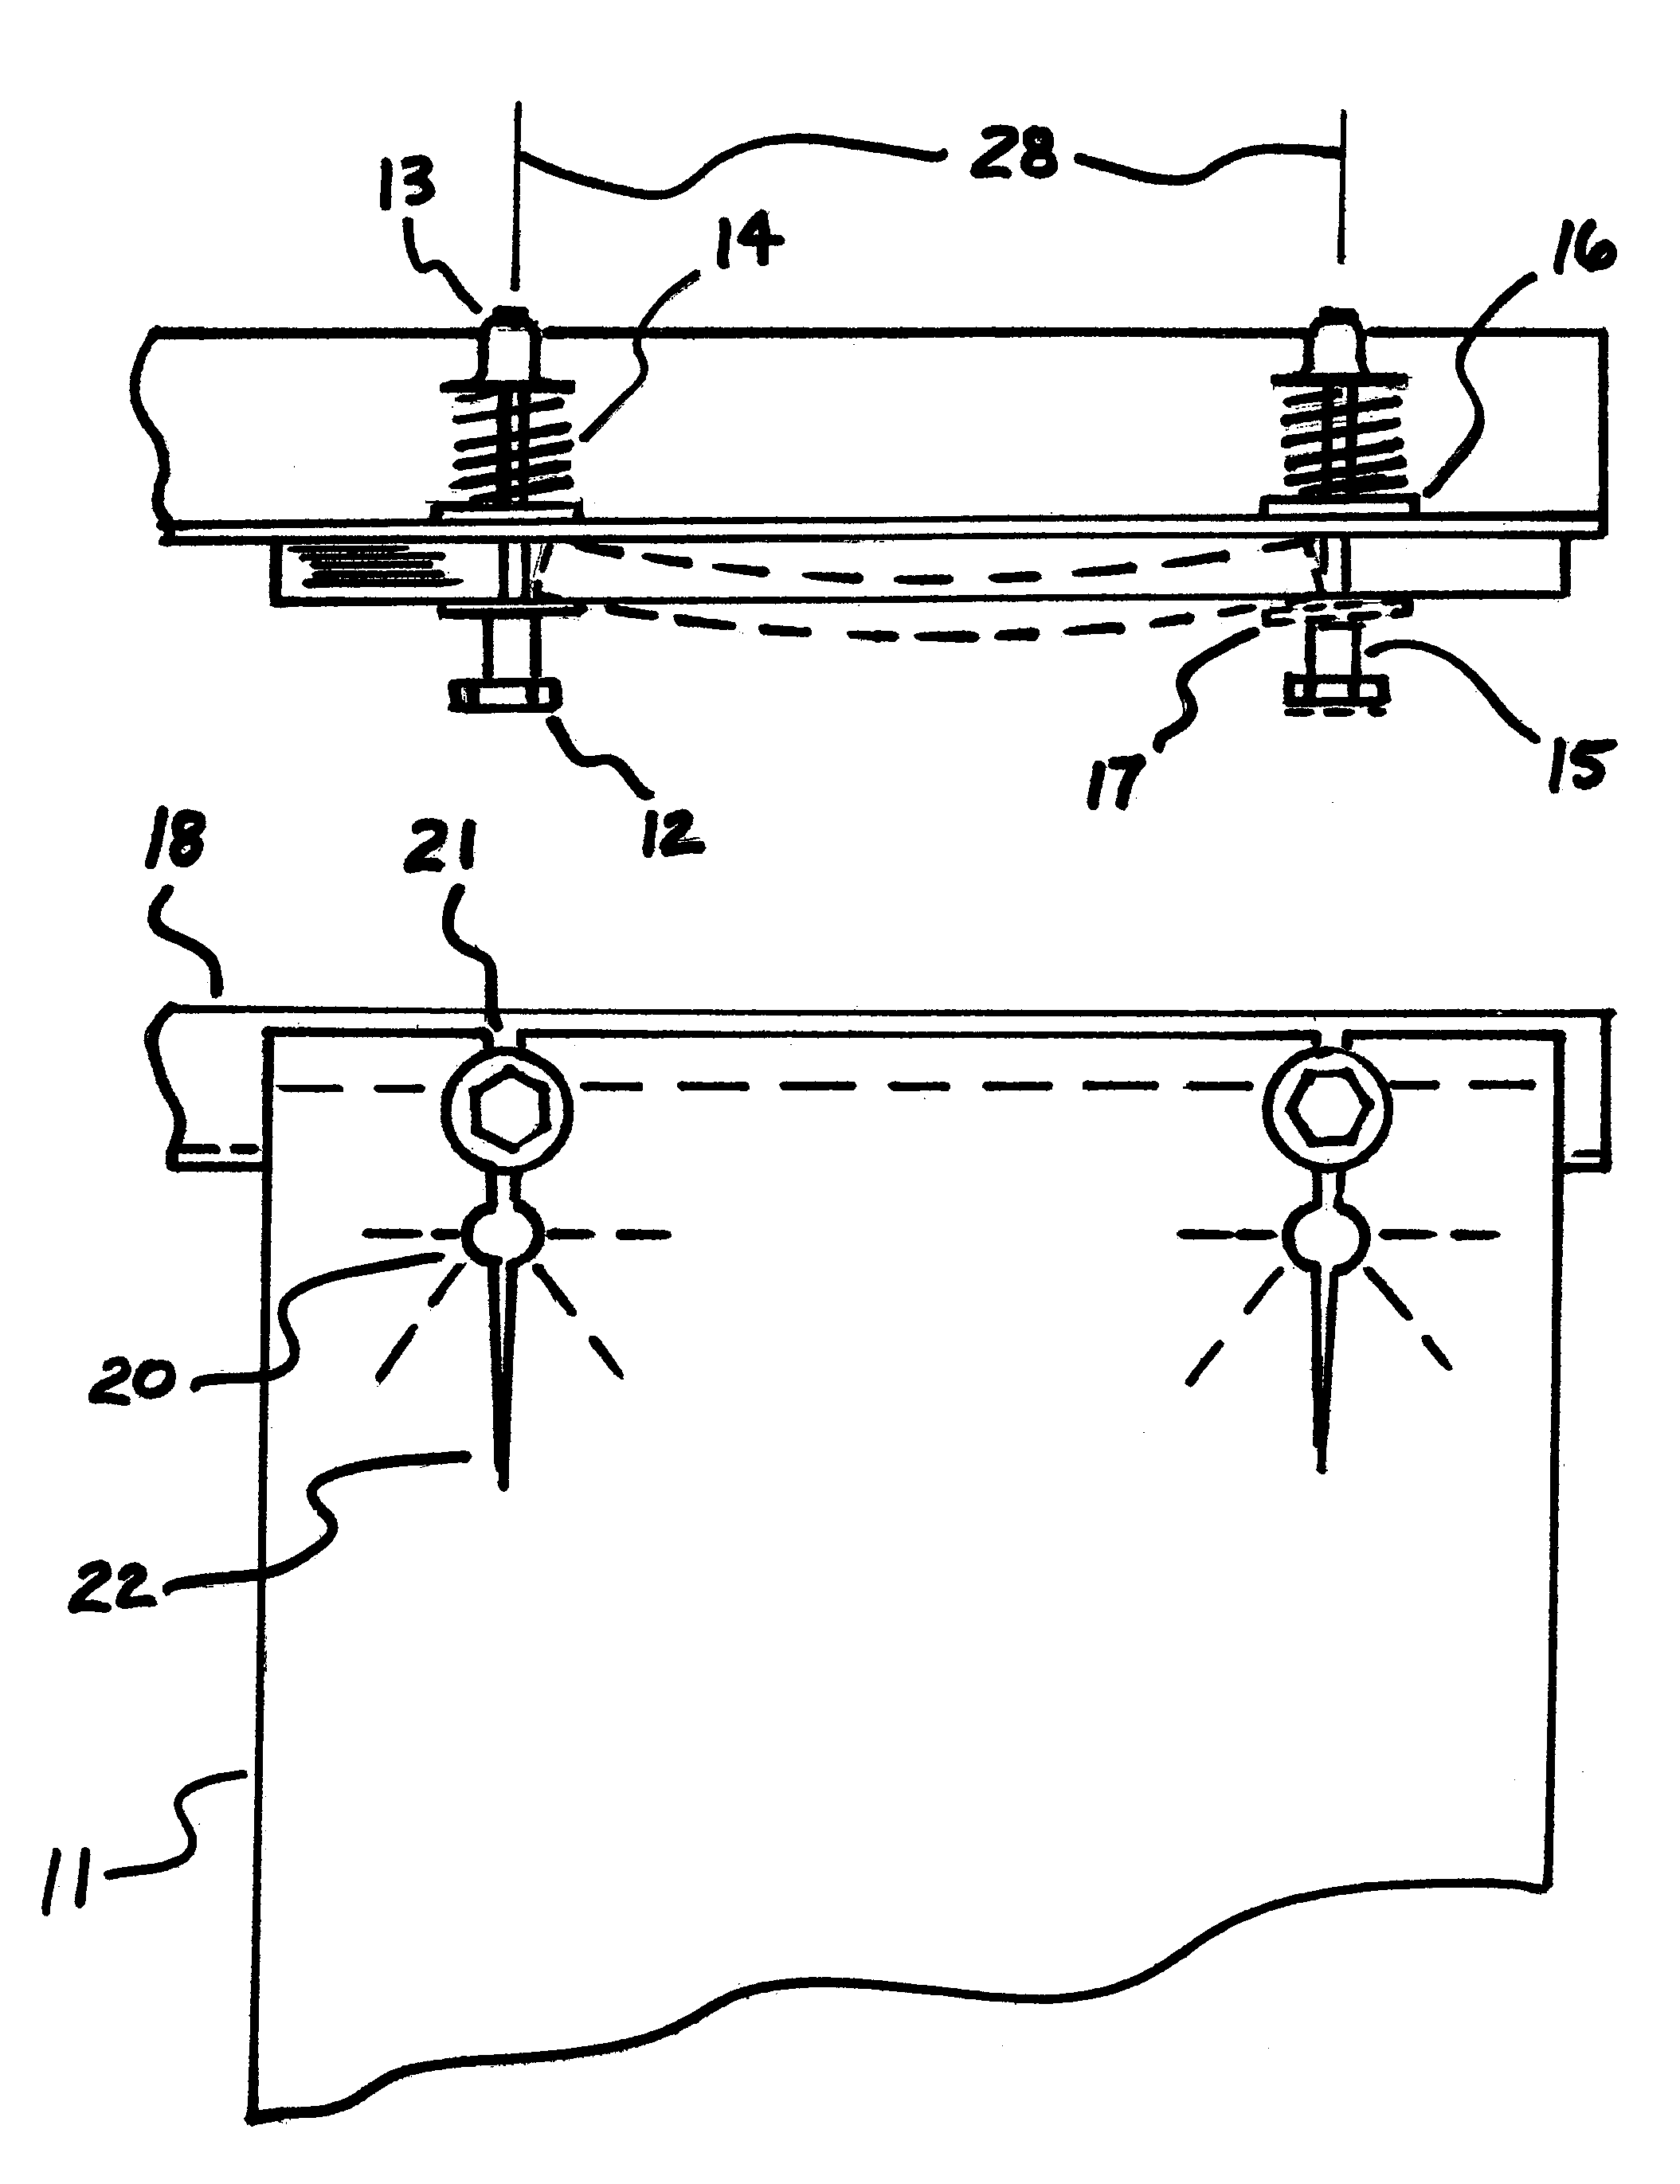 Mud flap mounting system and method for use thereof